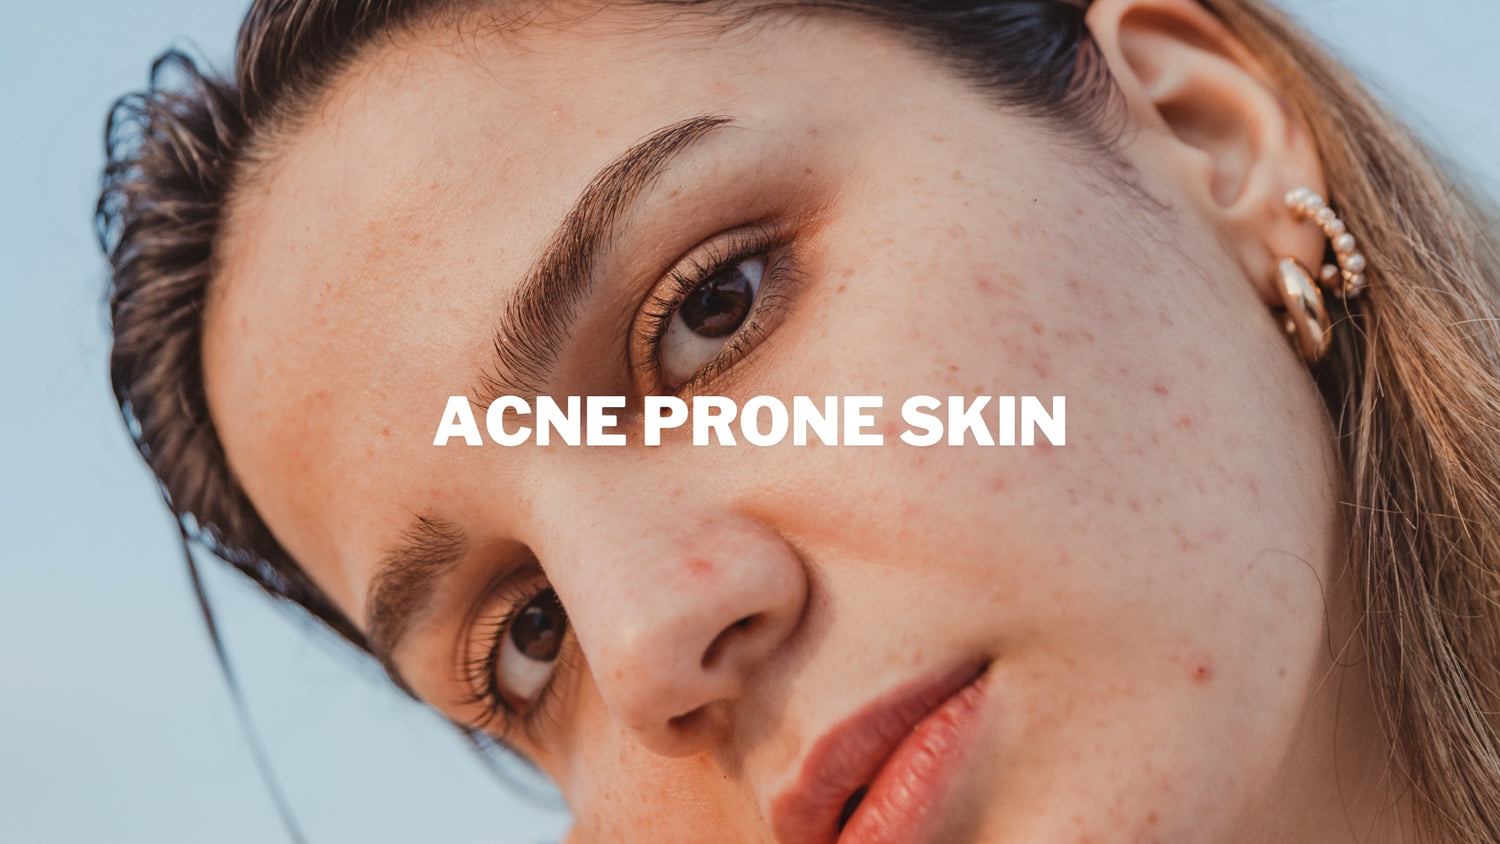 acne face skincare for women from Bree probiotics